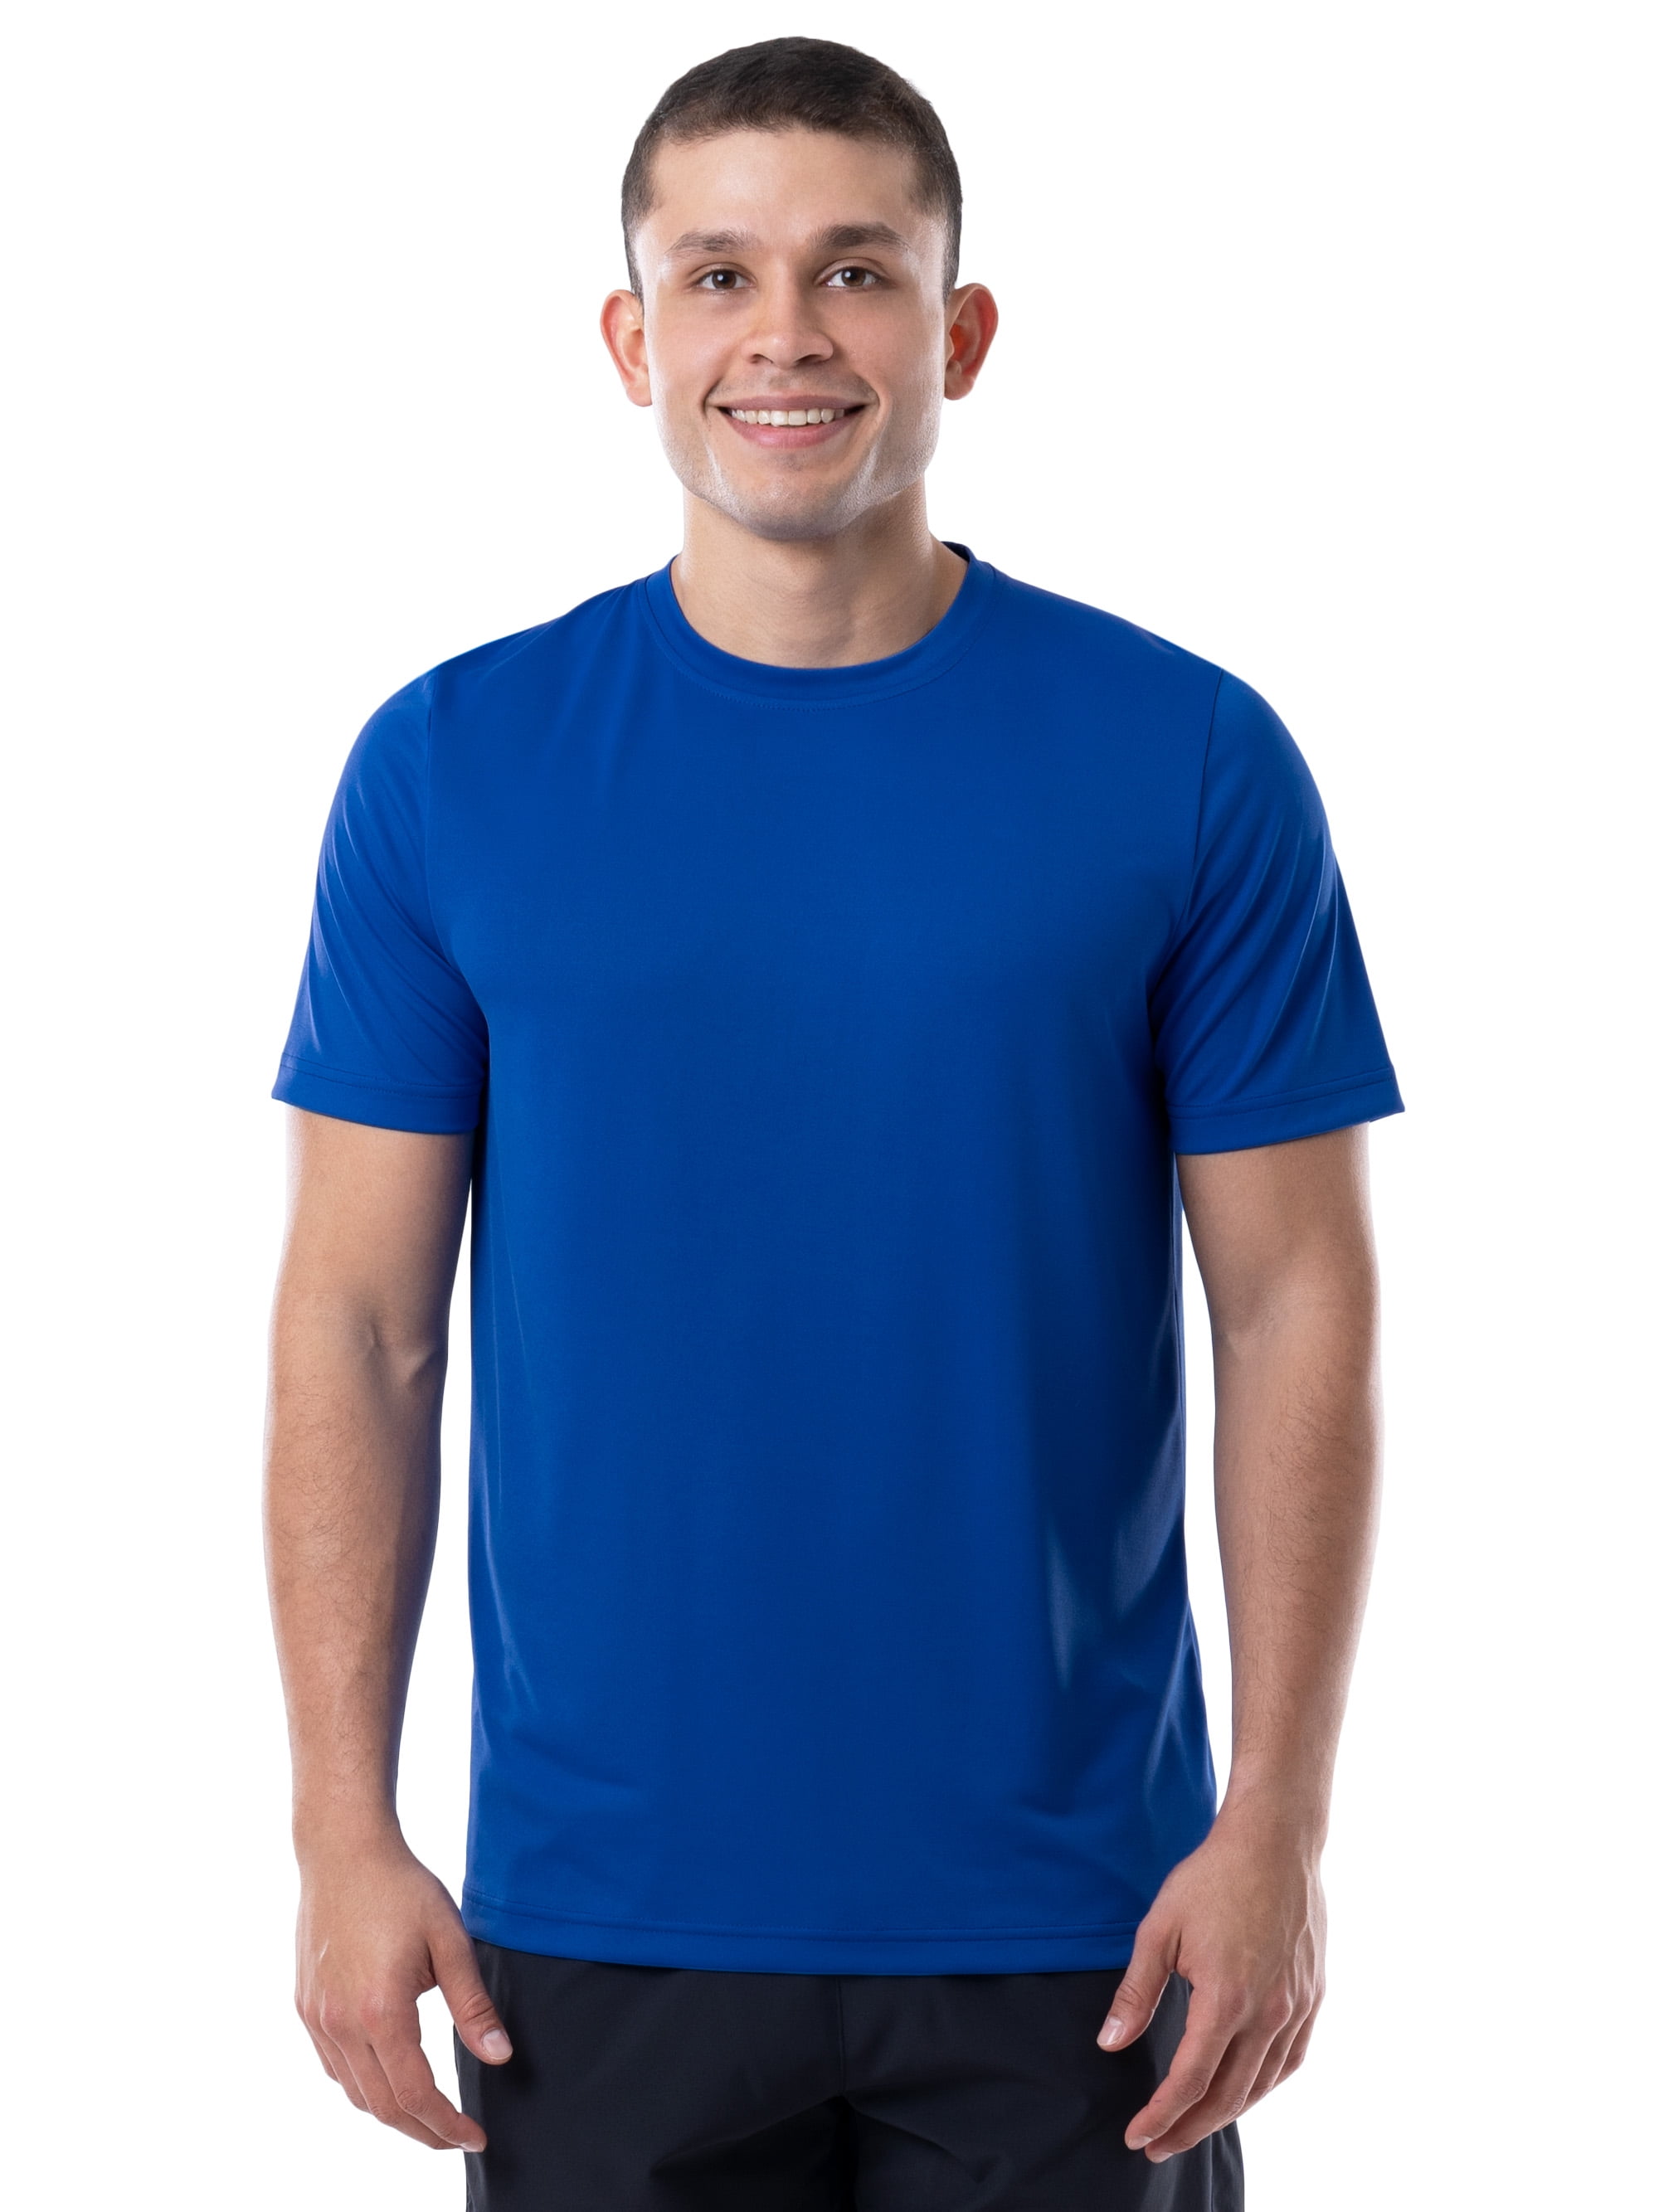 Athletic Works Men's Core Active Solid & Printed Jersey T-Shirt, Sizes S-3XL